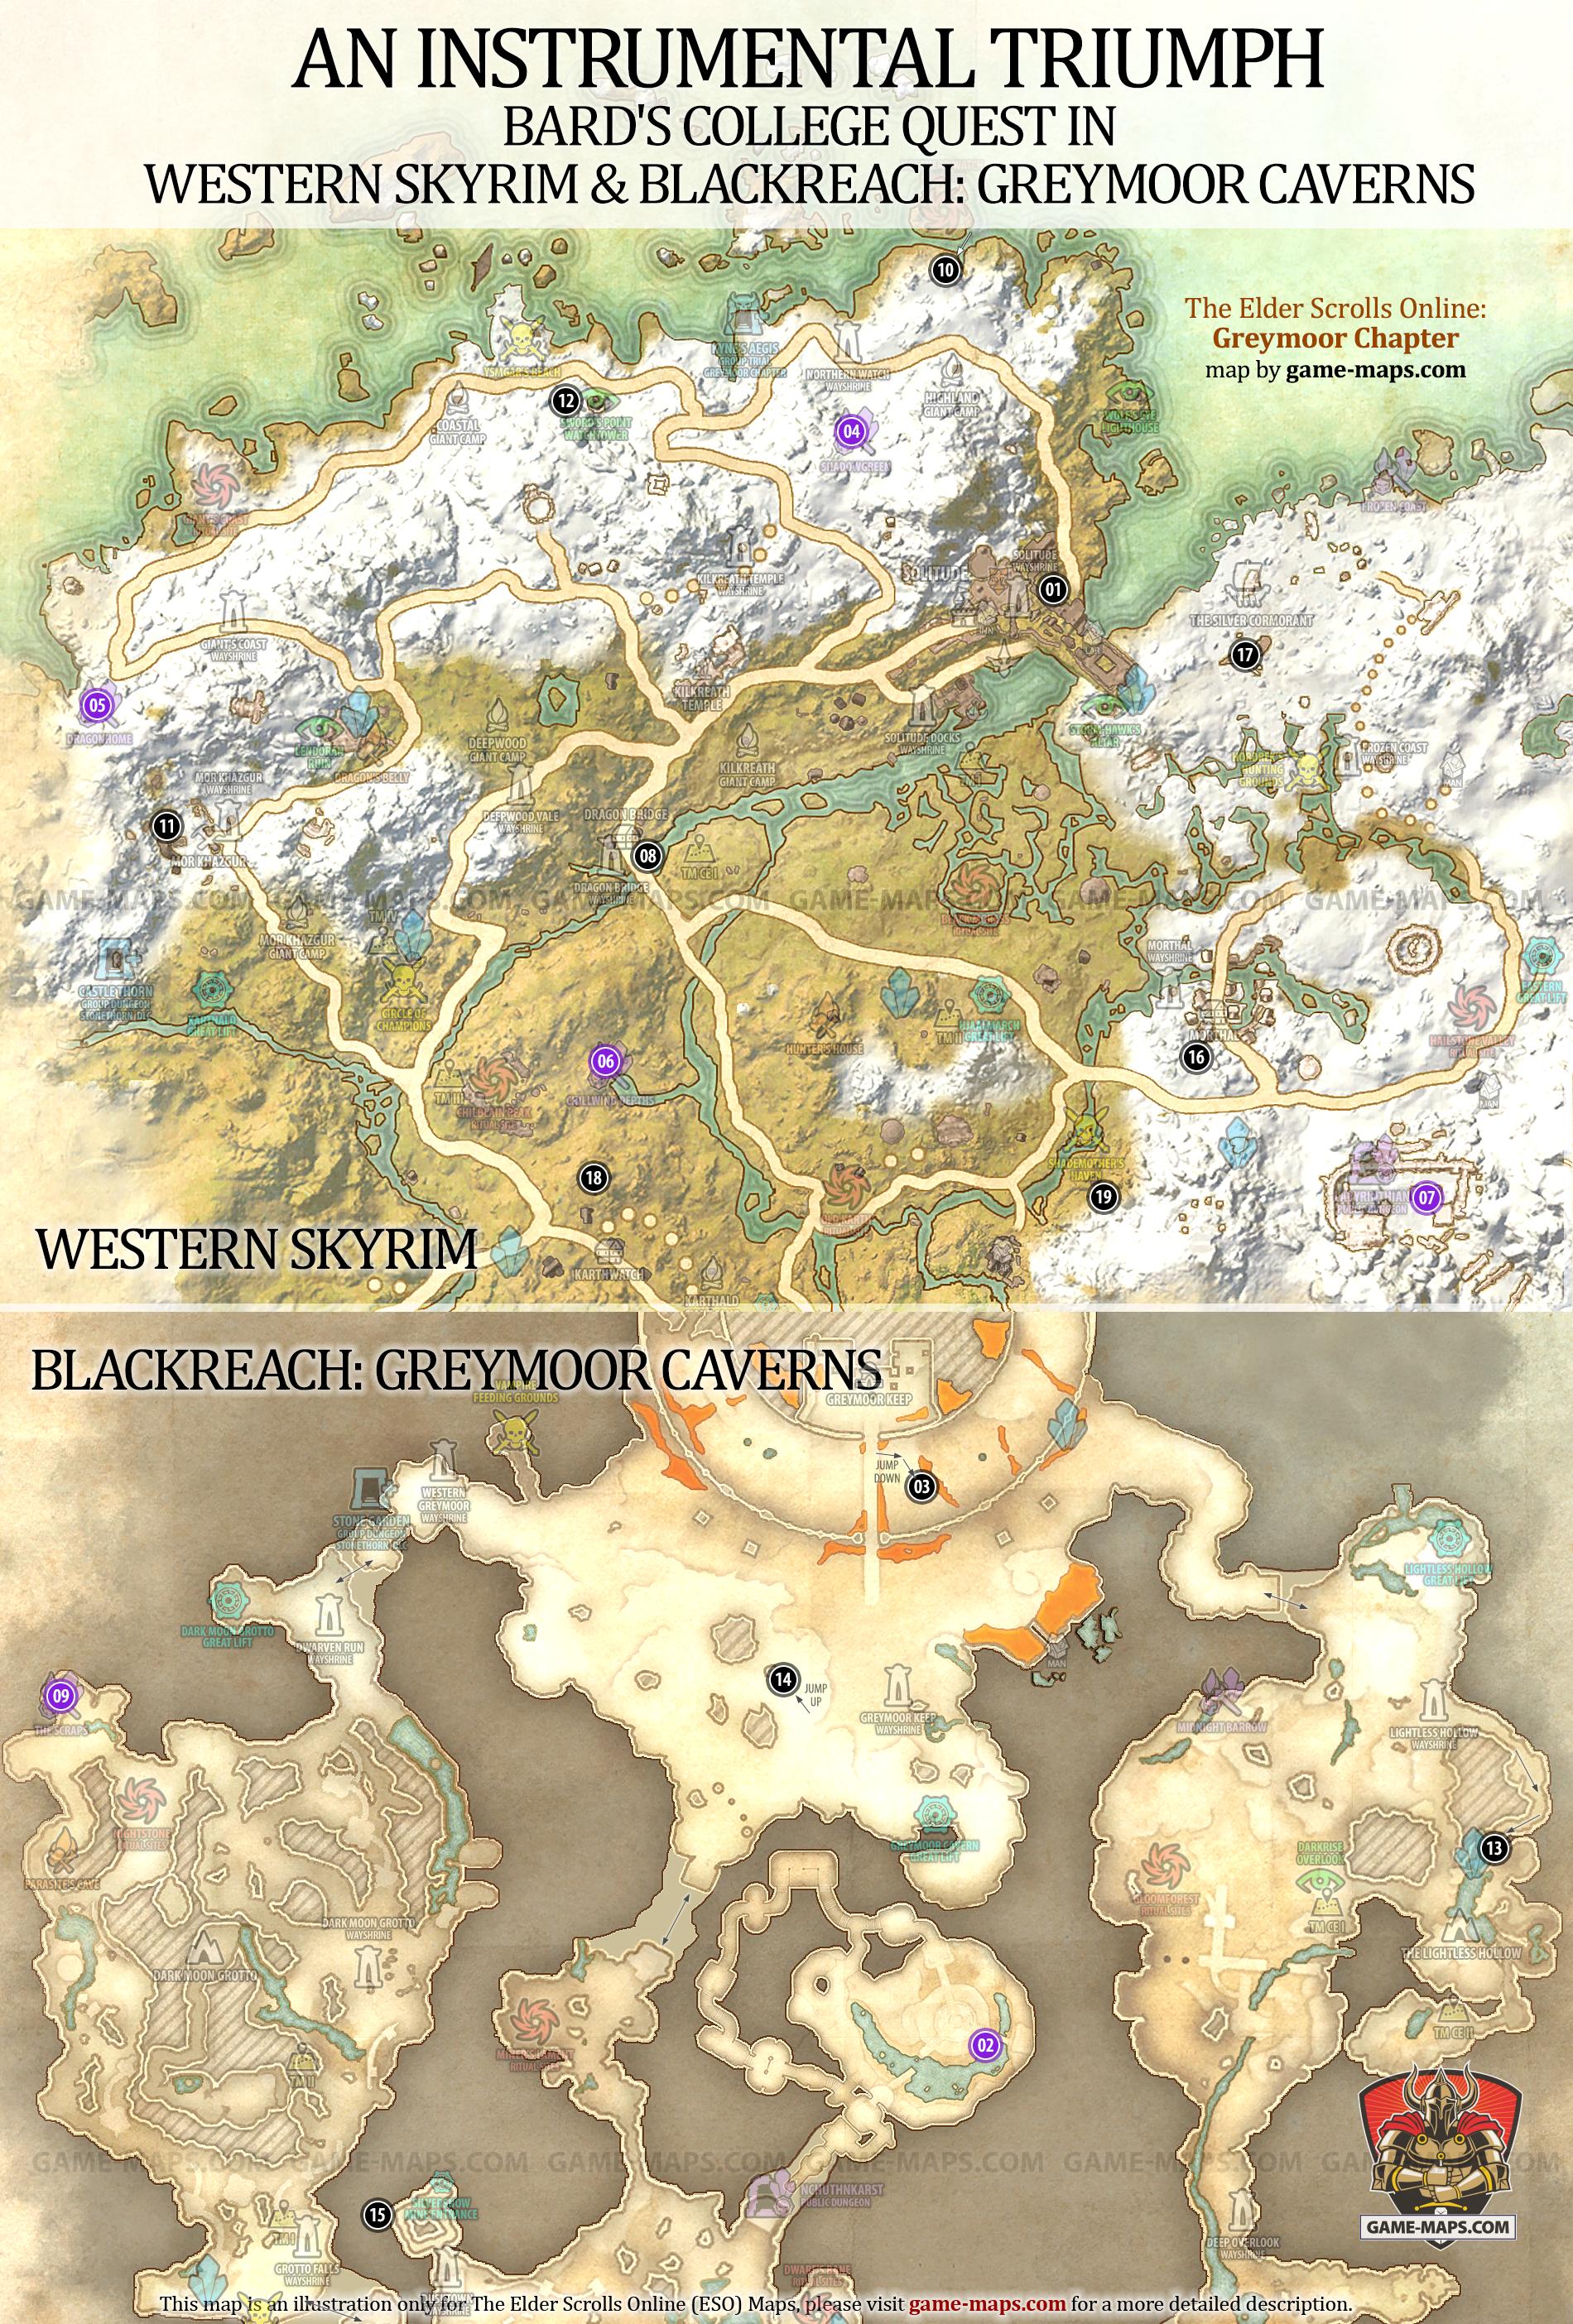 Location of missing musical instruments in ESO for An Instrumental Triumph Achievement and Solitude Bard's College Quest in Western Skyrim.